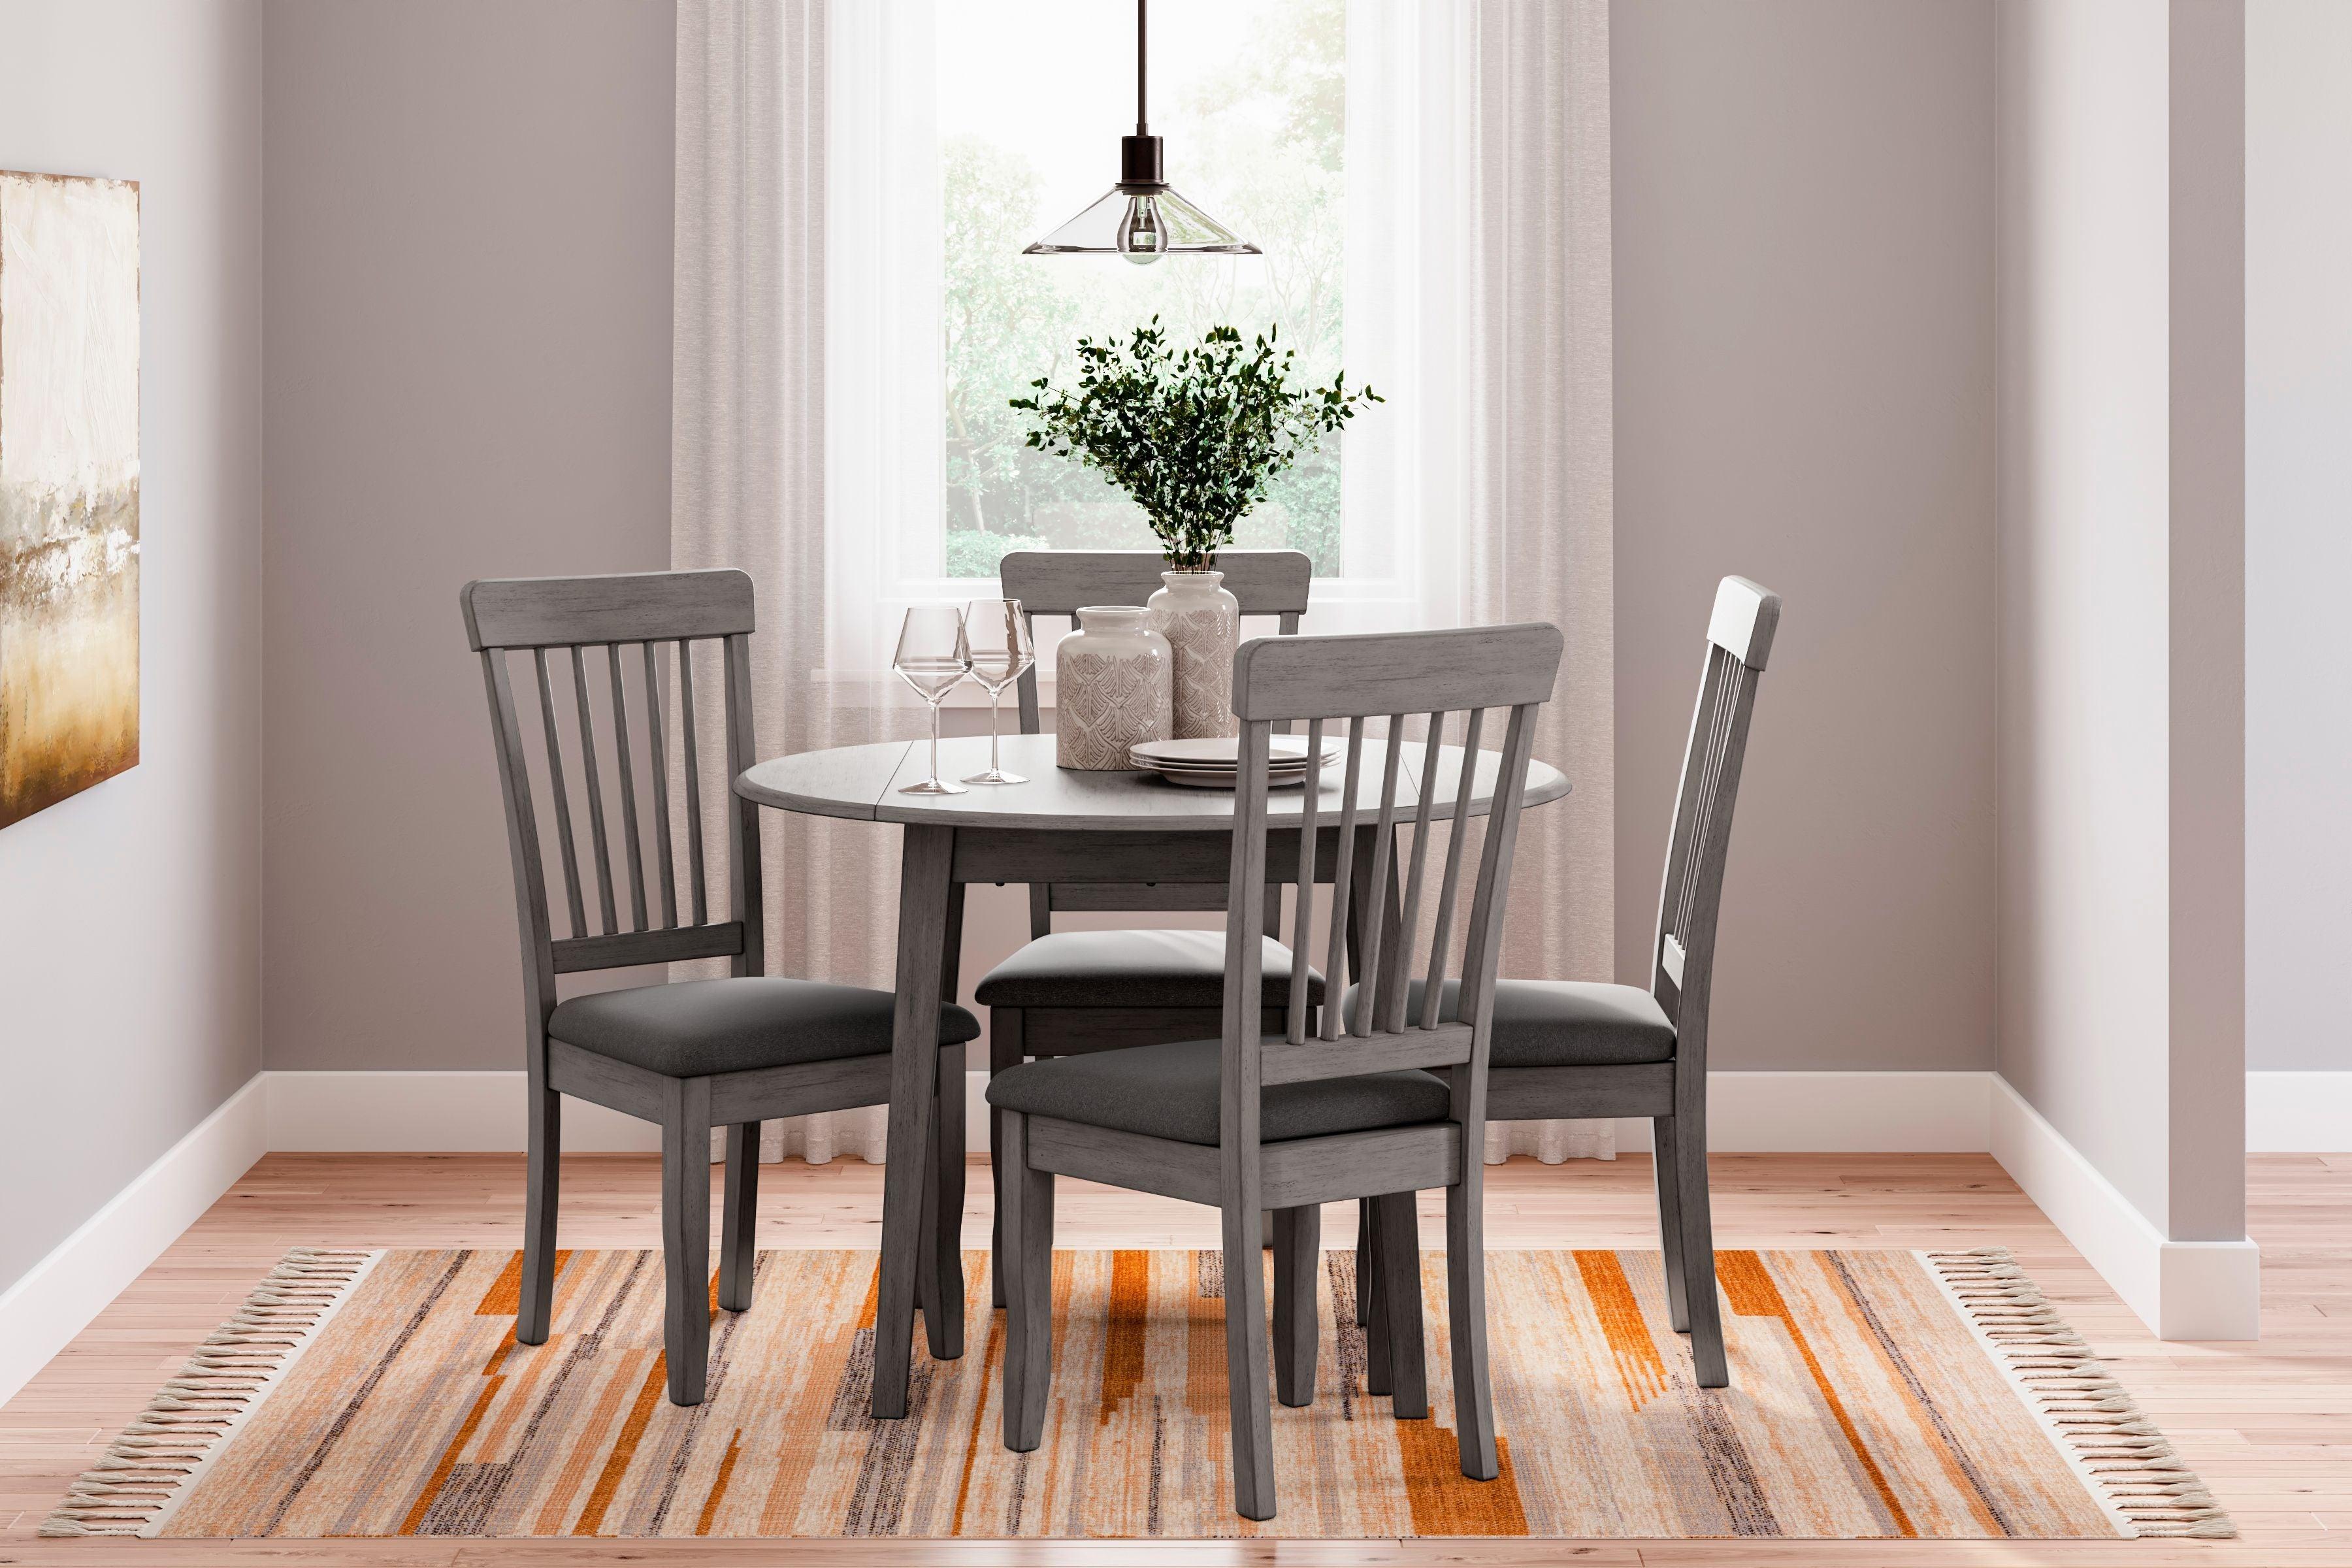 Signature Design by Ashley® - Shullden - Gray - 5 Pc. - Drop Leaf Table, 4 Side Chairs - 5th Avenue Furniture